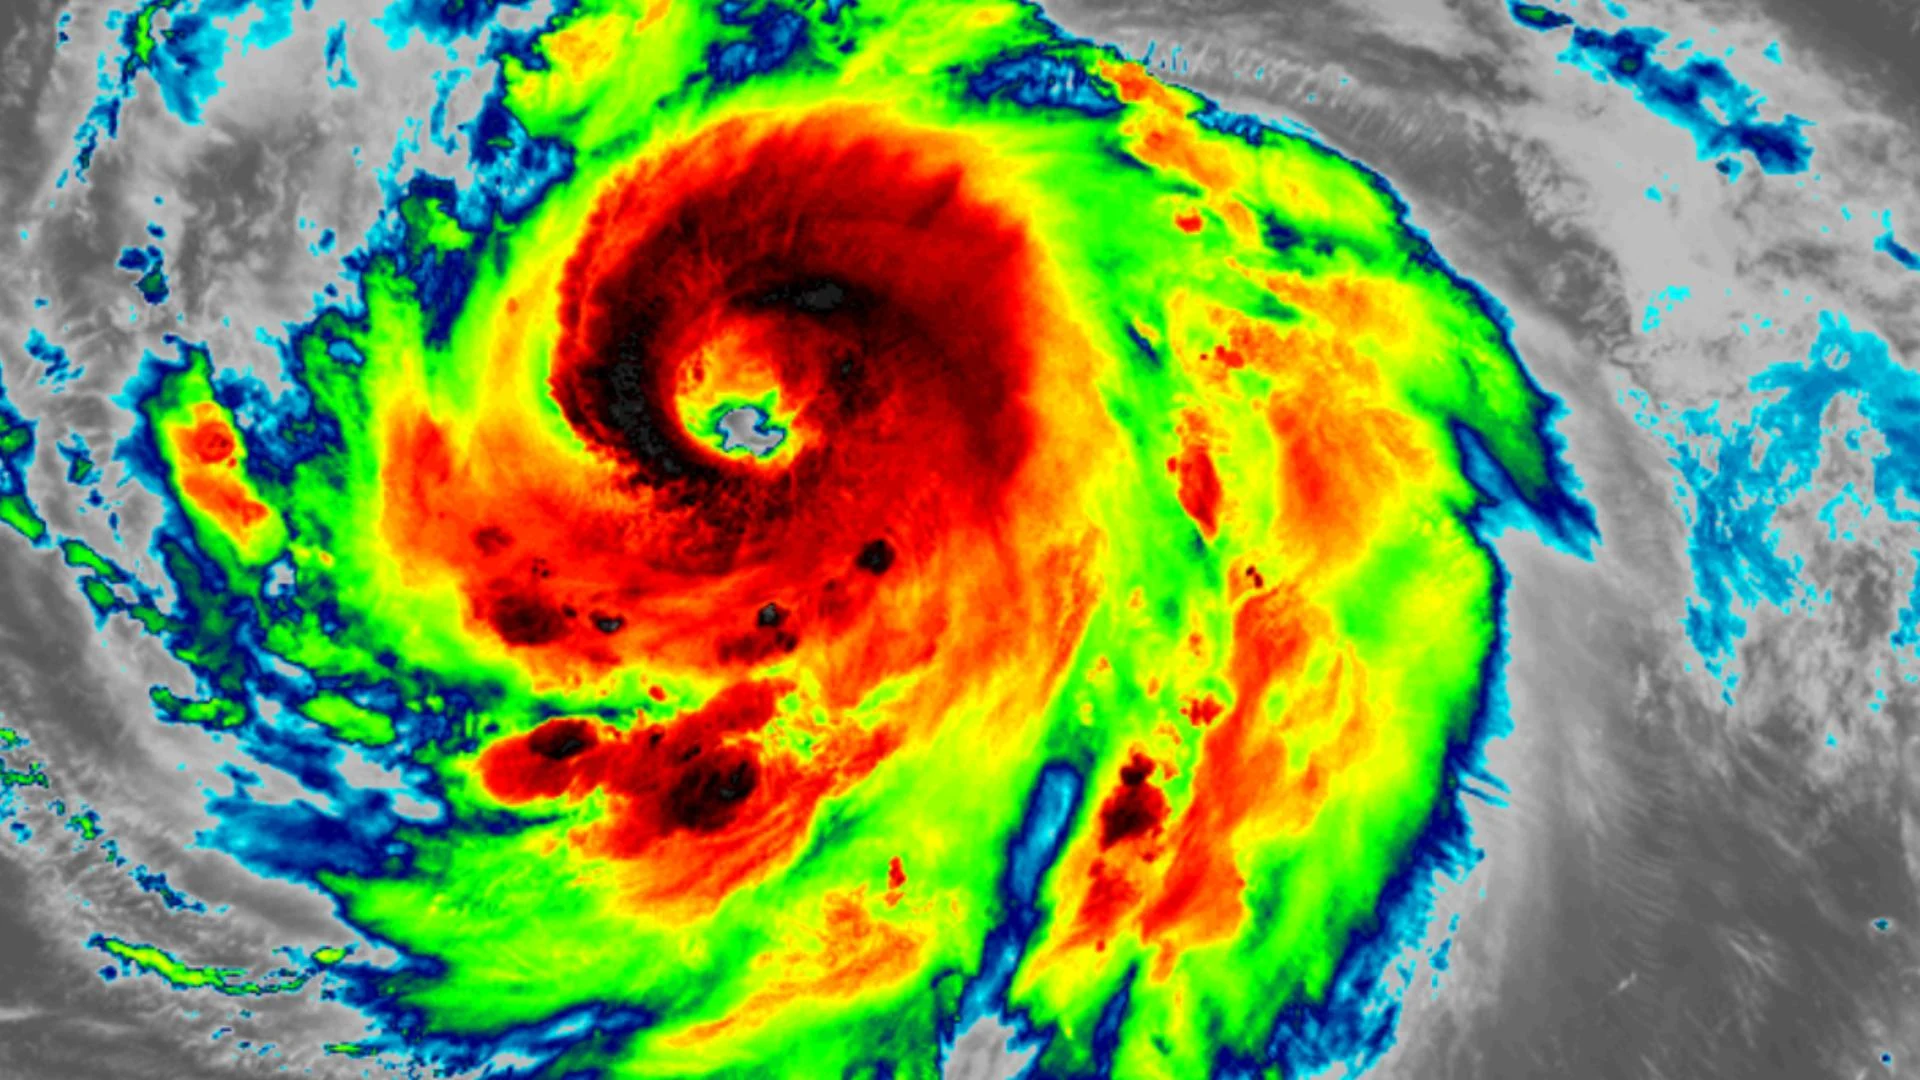 Haishen becomes 2020's first super typhoon, Japan braces for impact